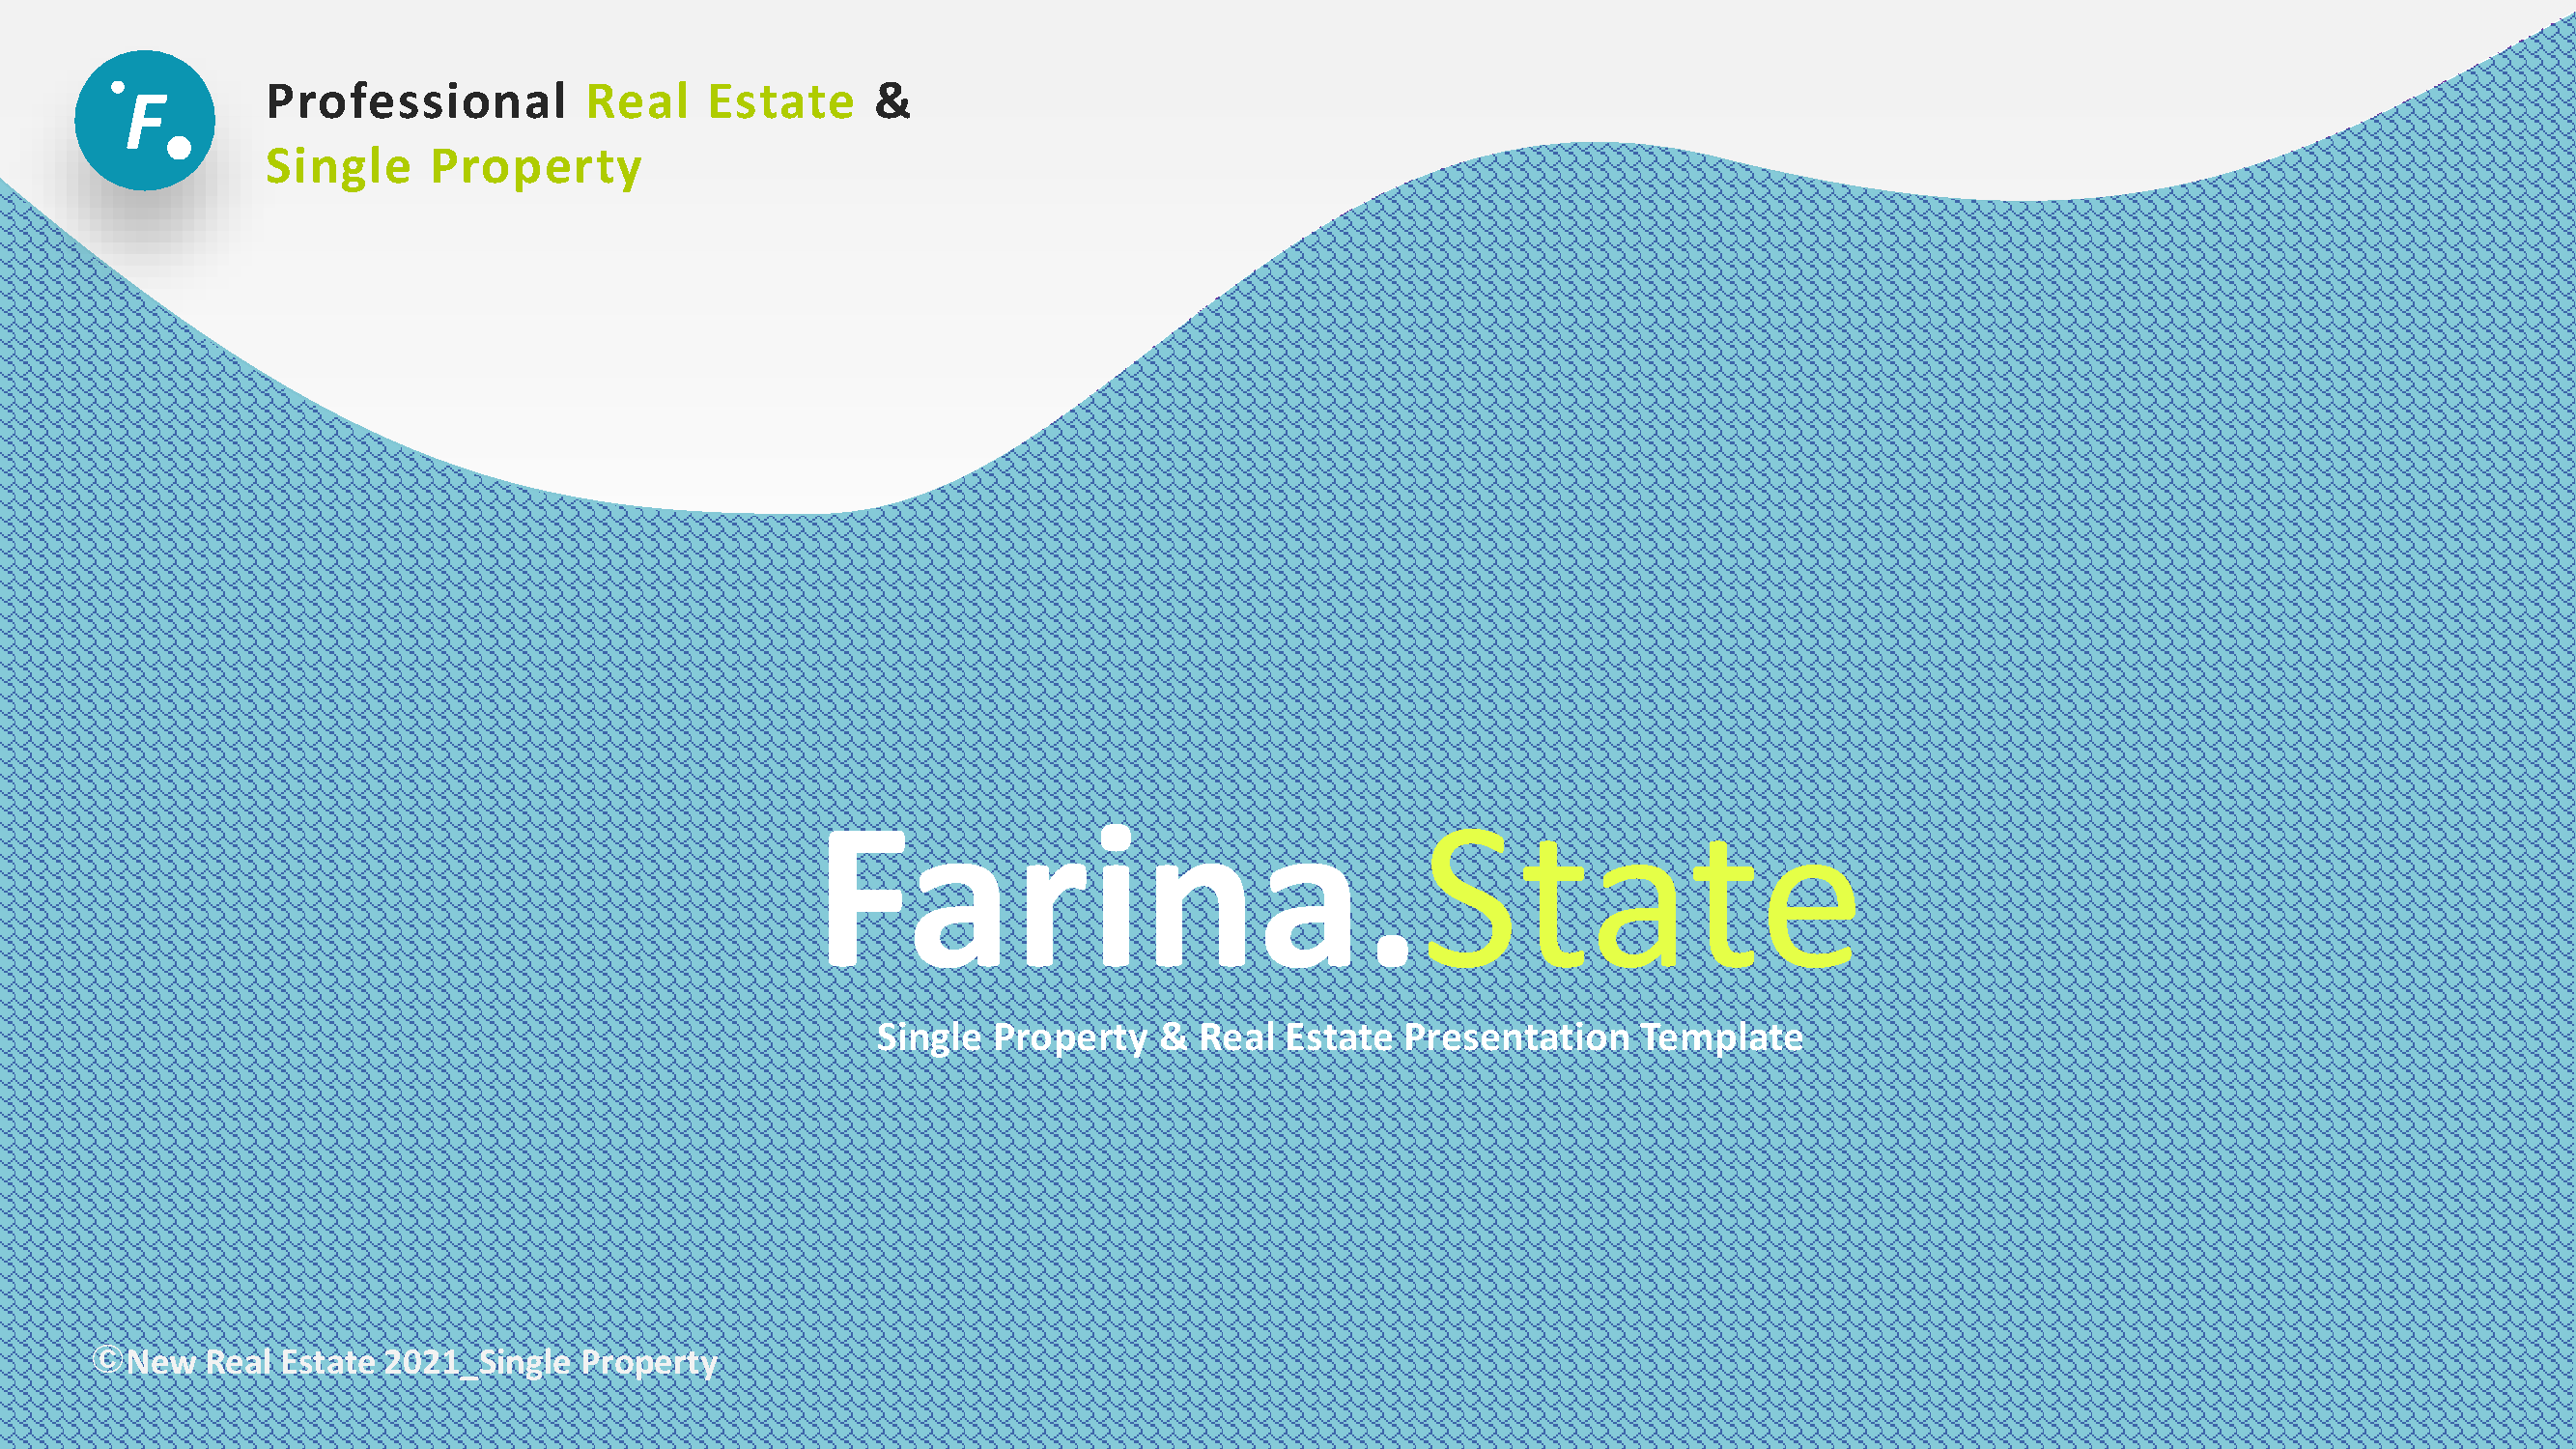 farina-real-estate-powerpoint-template-AAGUPNF